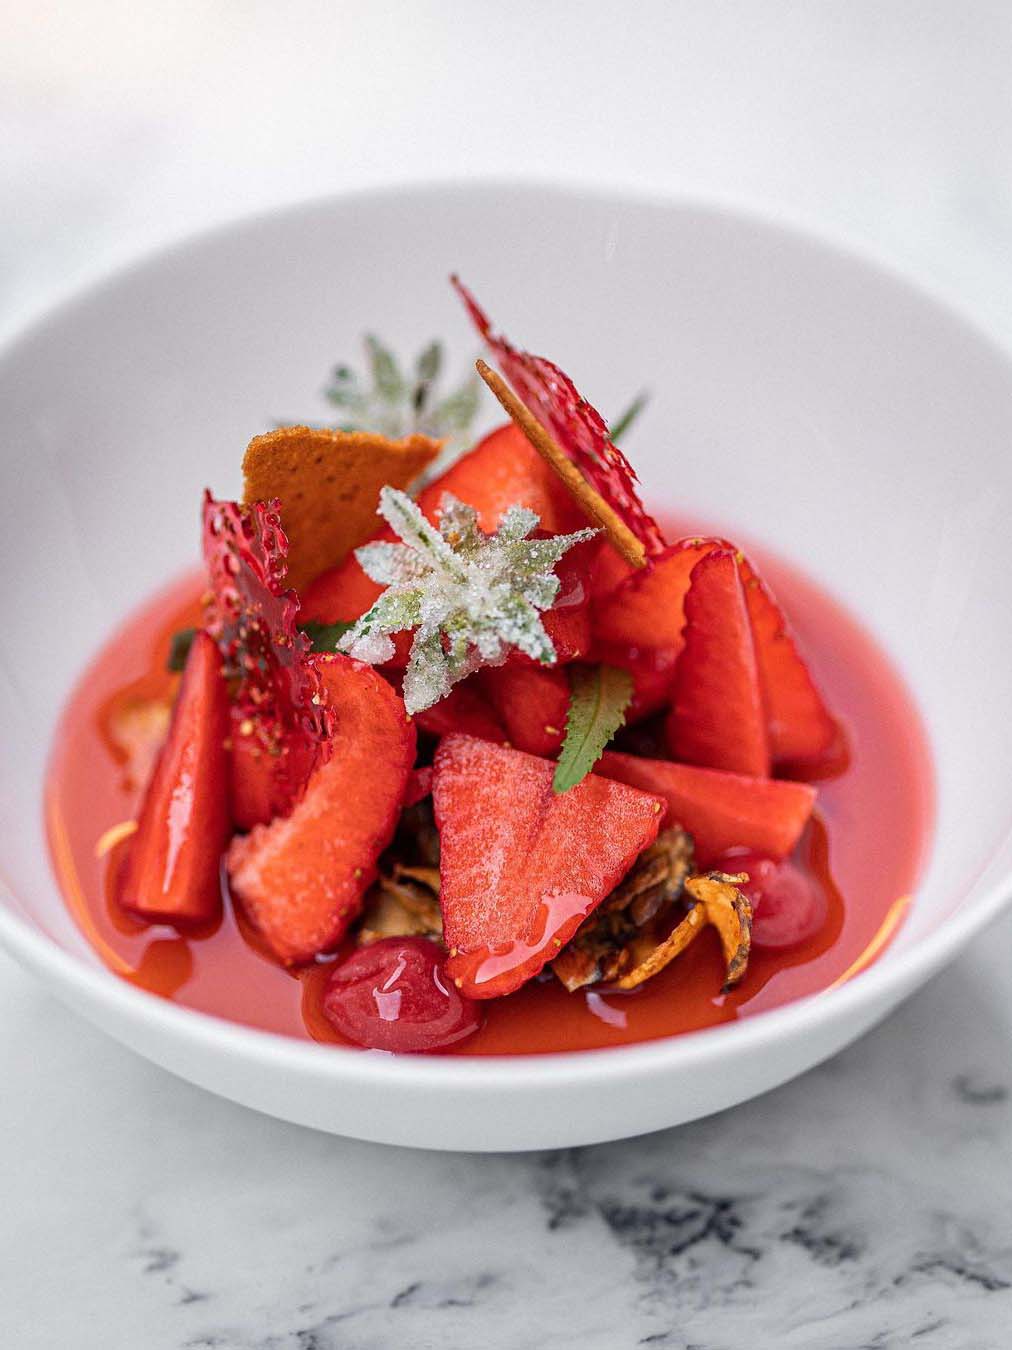 Don’t let overripe strawberries go to waste – turn into a versatile consommé